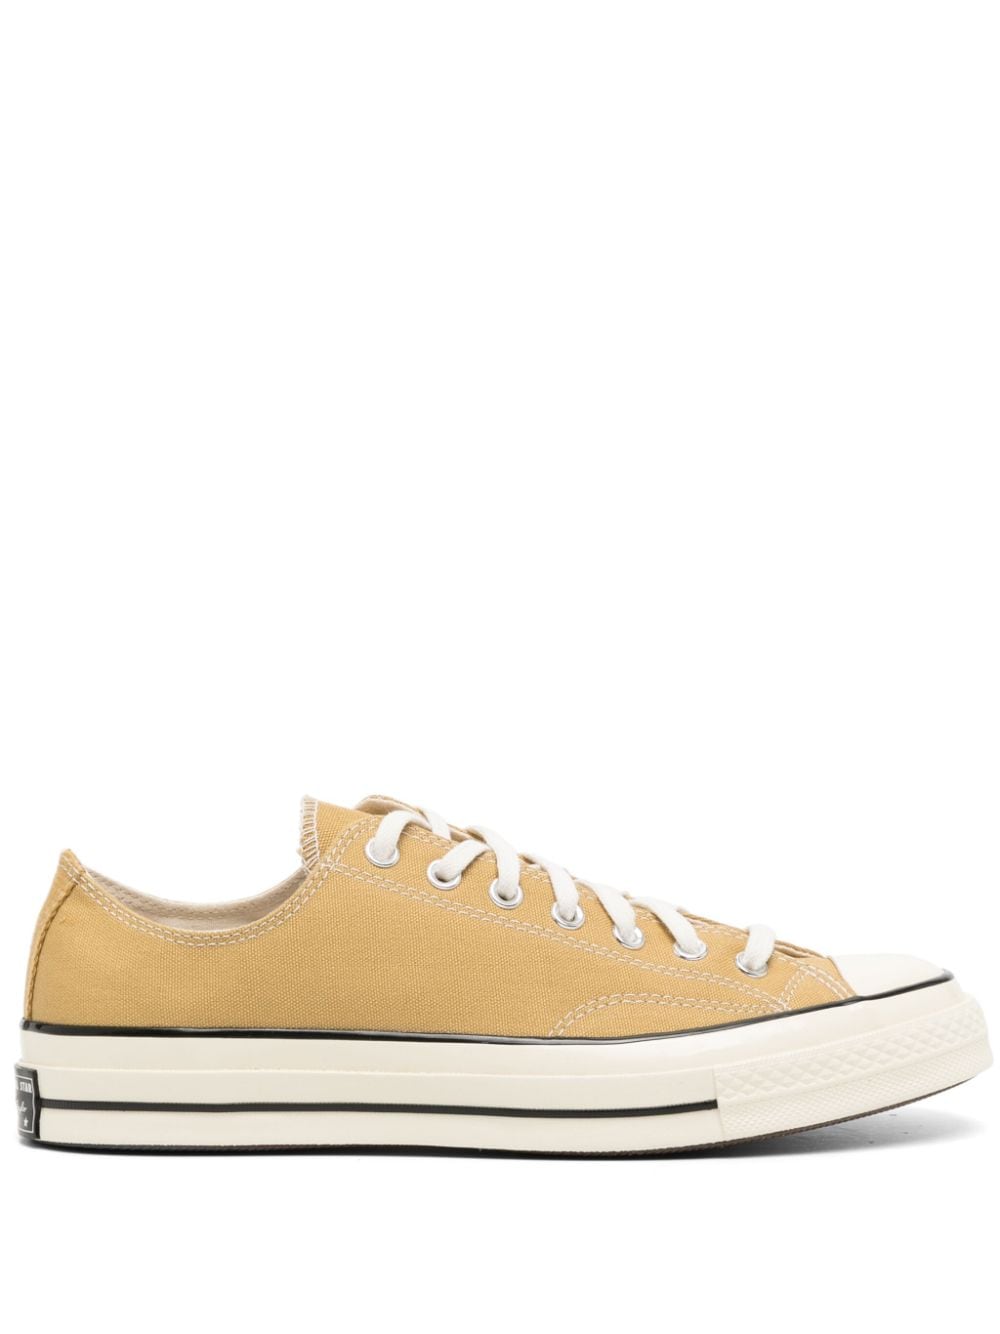 Image 1 of Converse Chuck 70 Low OX sneakers